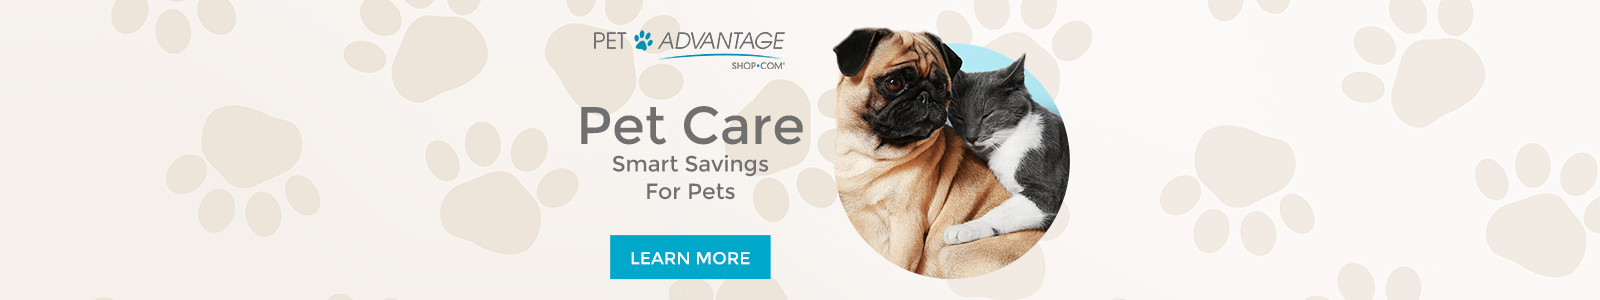 Pet Care. Smart savings for pets. Learn More